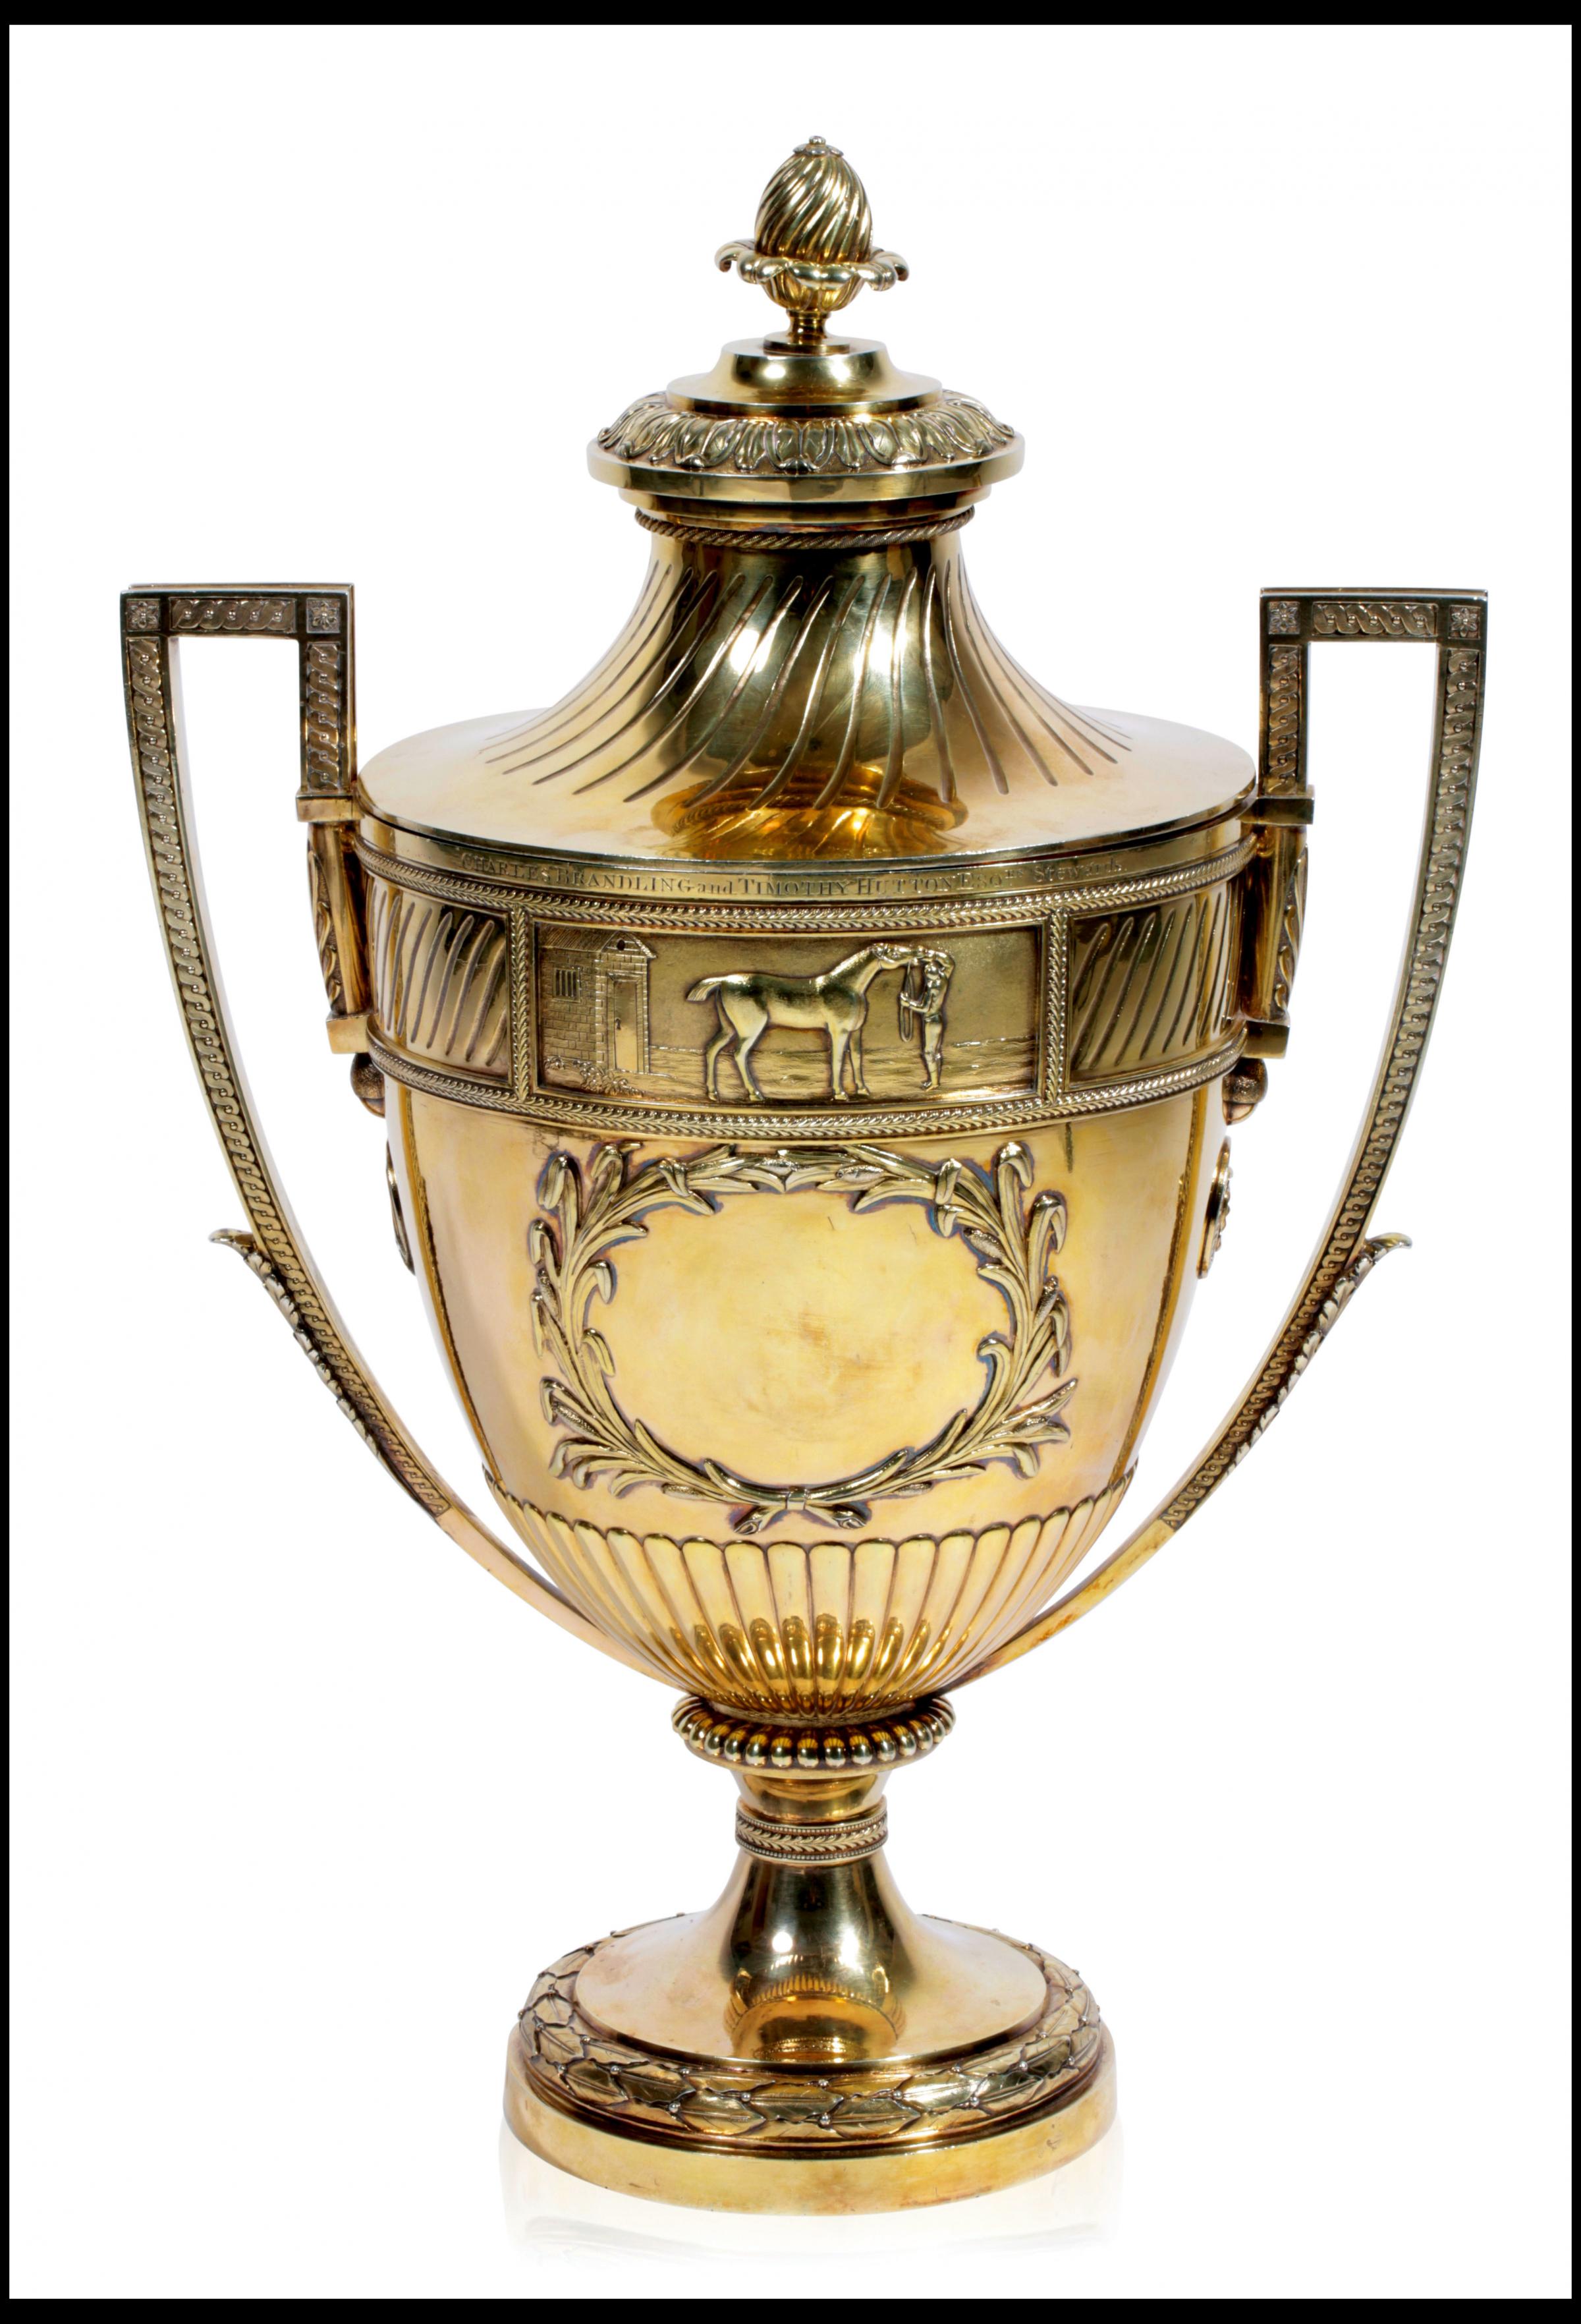 The 1802 Richmond Gold Cup which was auctioned in 2019 for £30,000. Silvio won the cup 40 years earlier